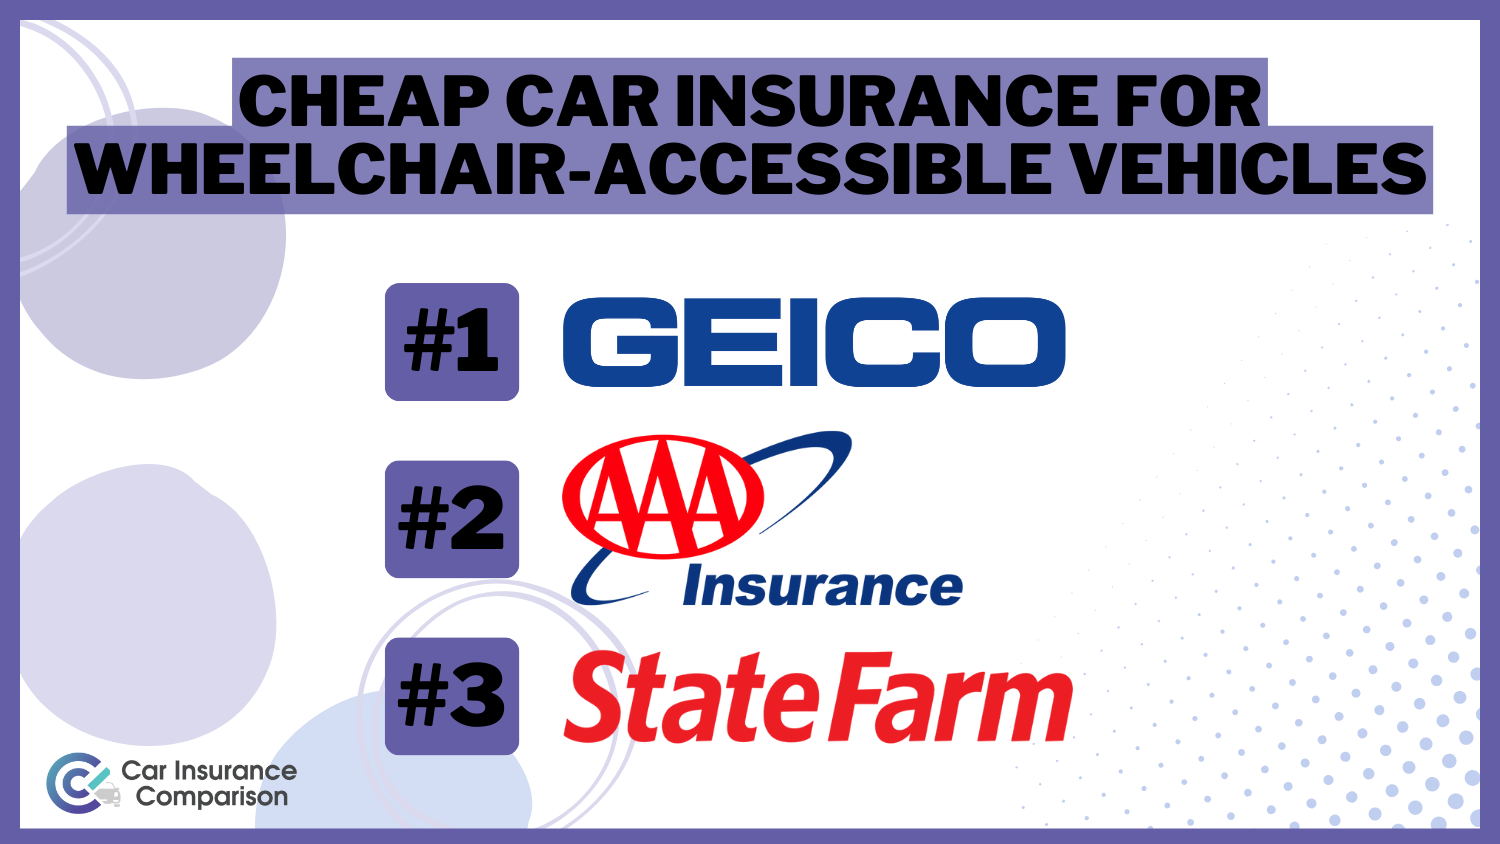 Cheap Car Insurance for Wheelchair-Accessible Vehicles: Geico, AAA, and State Farm